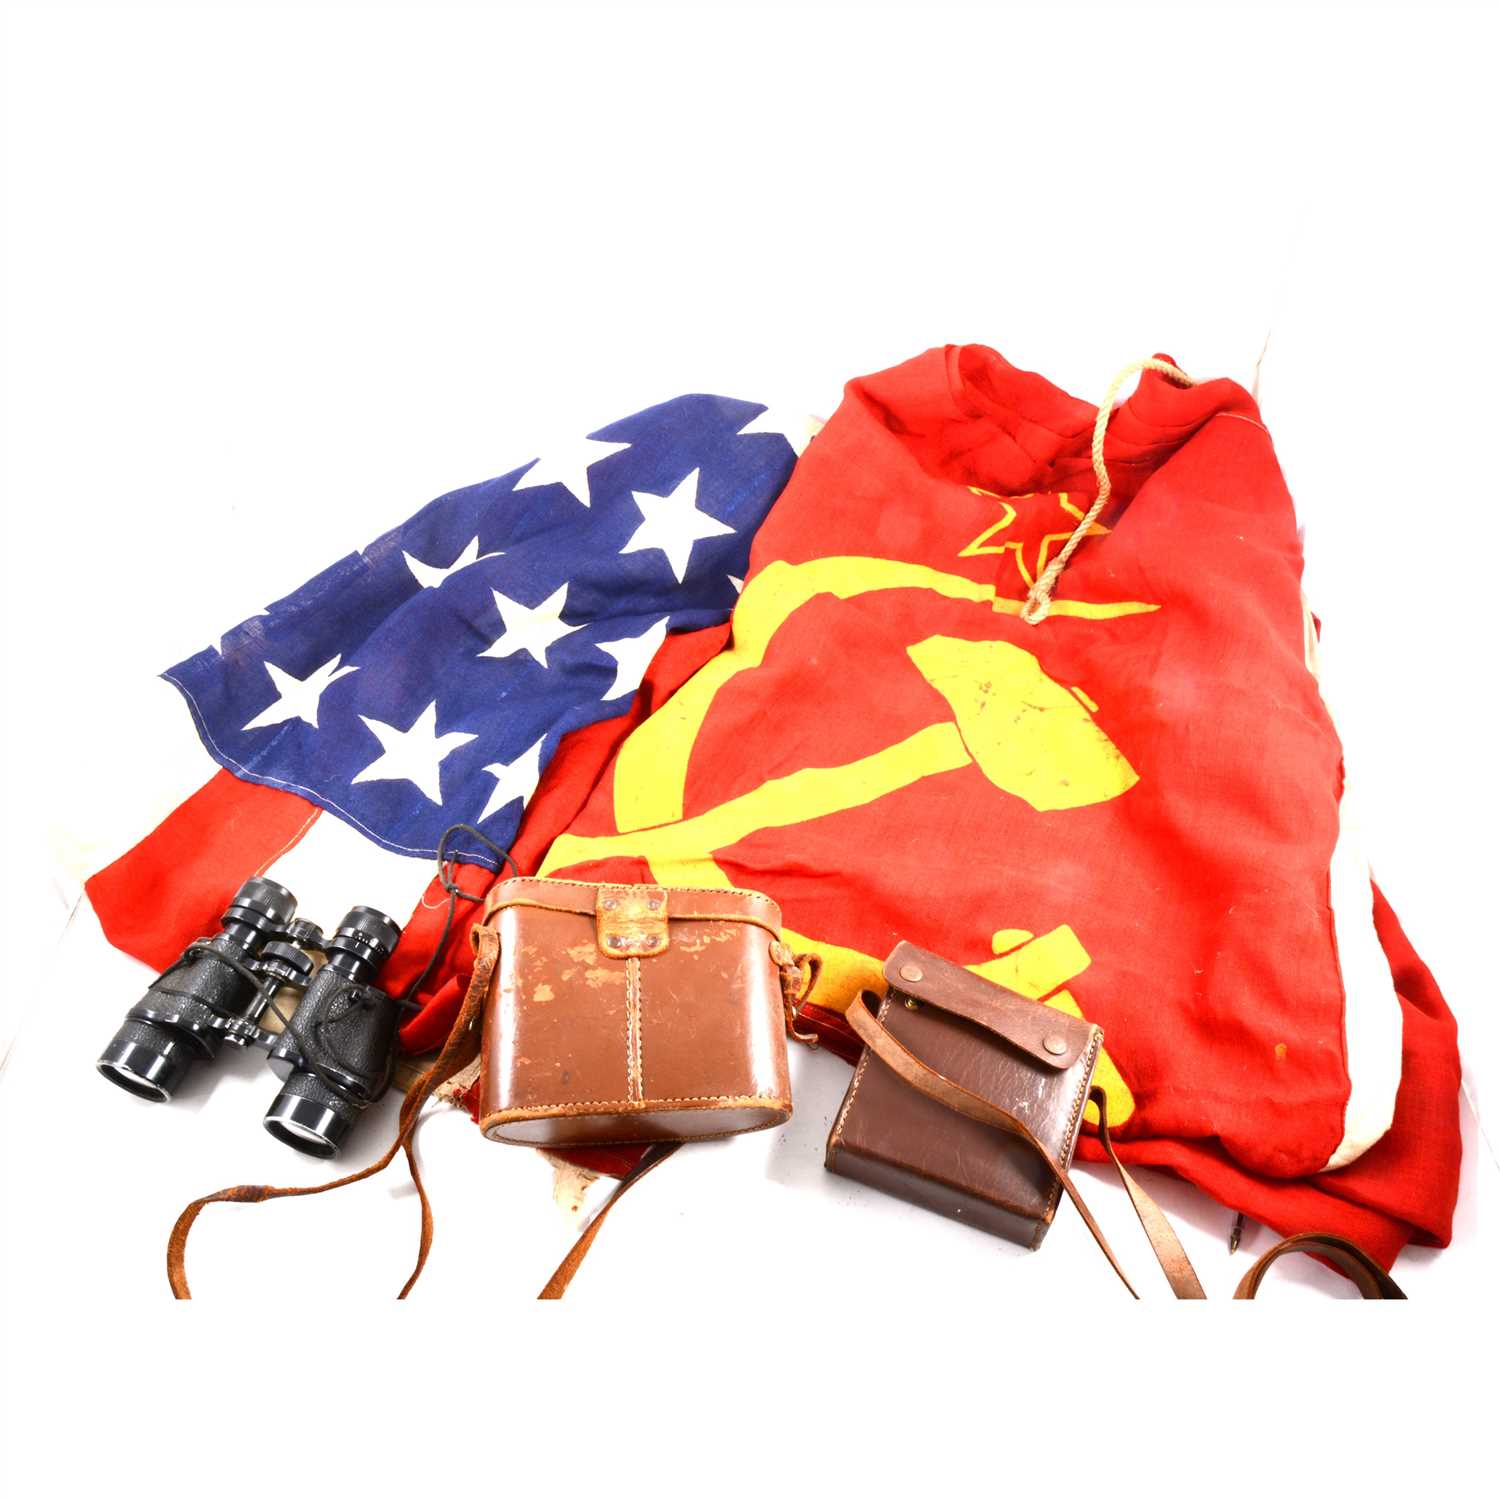 Lot 136 - A vintage American and a Soviet flag, copper scuttle, pair of Denhill binoculars, and voltmeter.